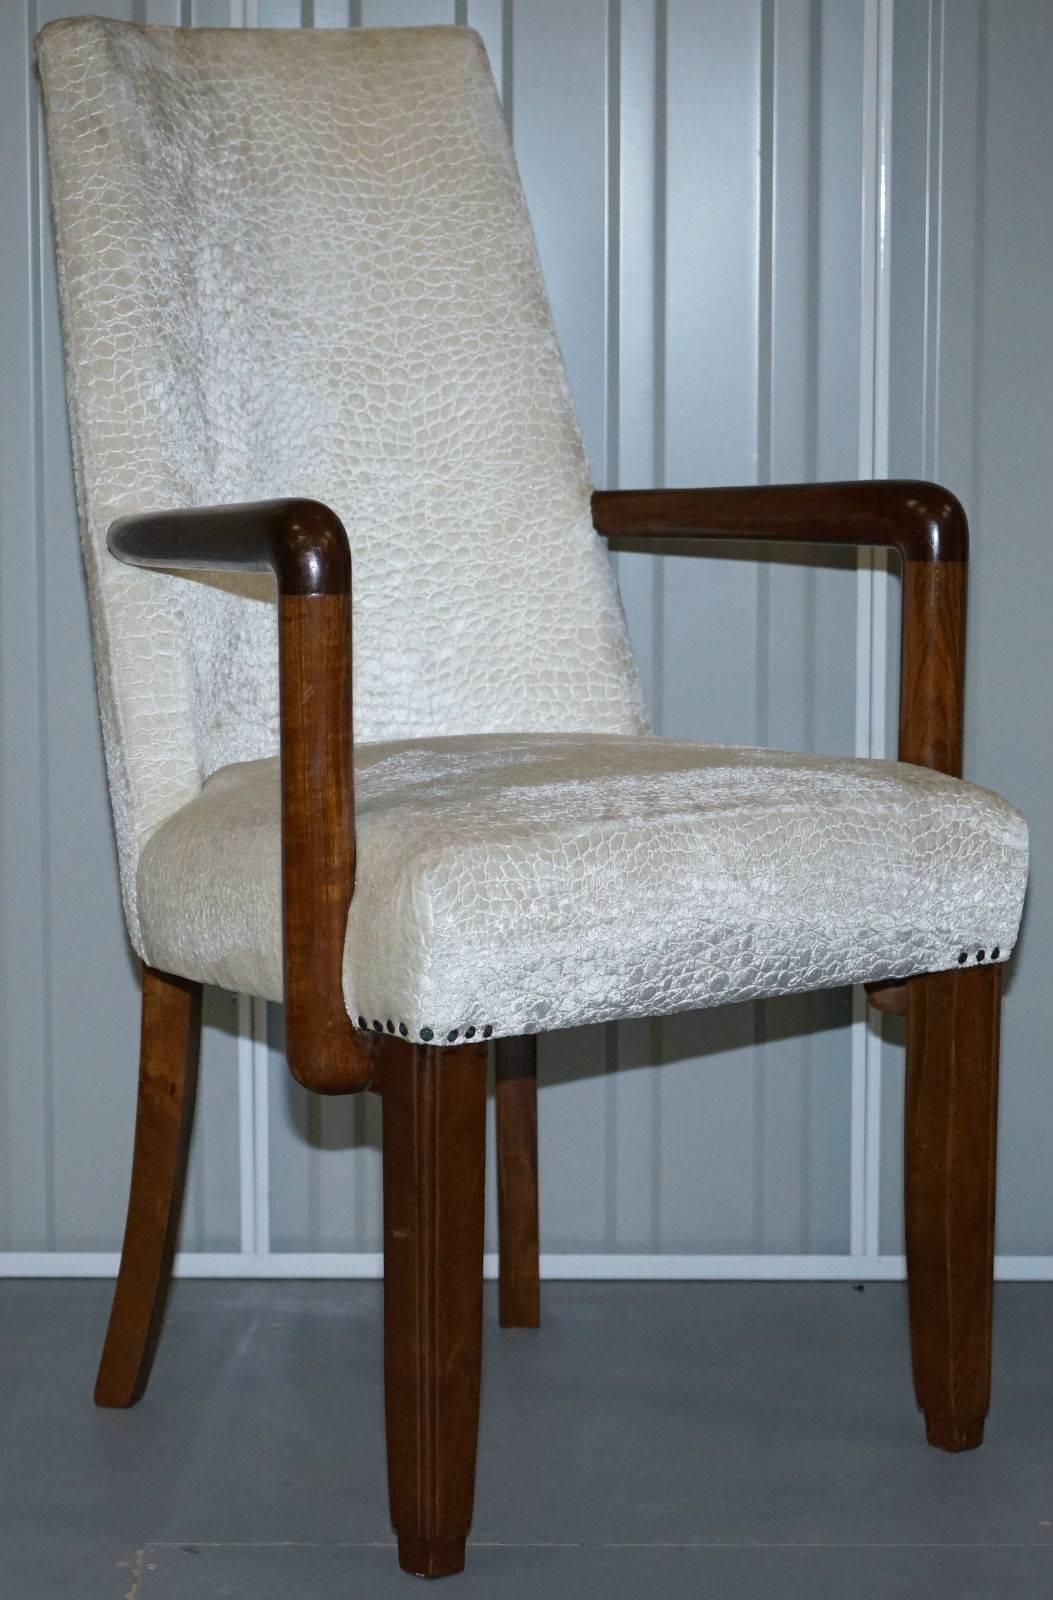 We are delighted to offer for sale this absolutely stunning pair of original 1960s Mid-Century Modern Danish wood open occasional armchairs

Recently upholstered in silk velvet white alligator patina fabric, the wood has been waxed polished and